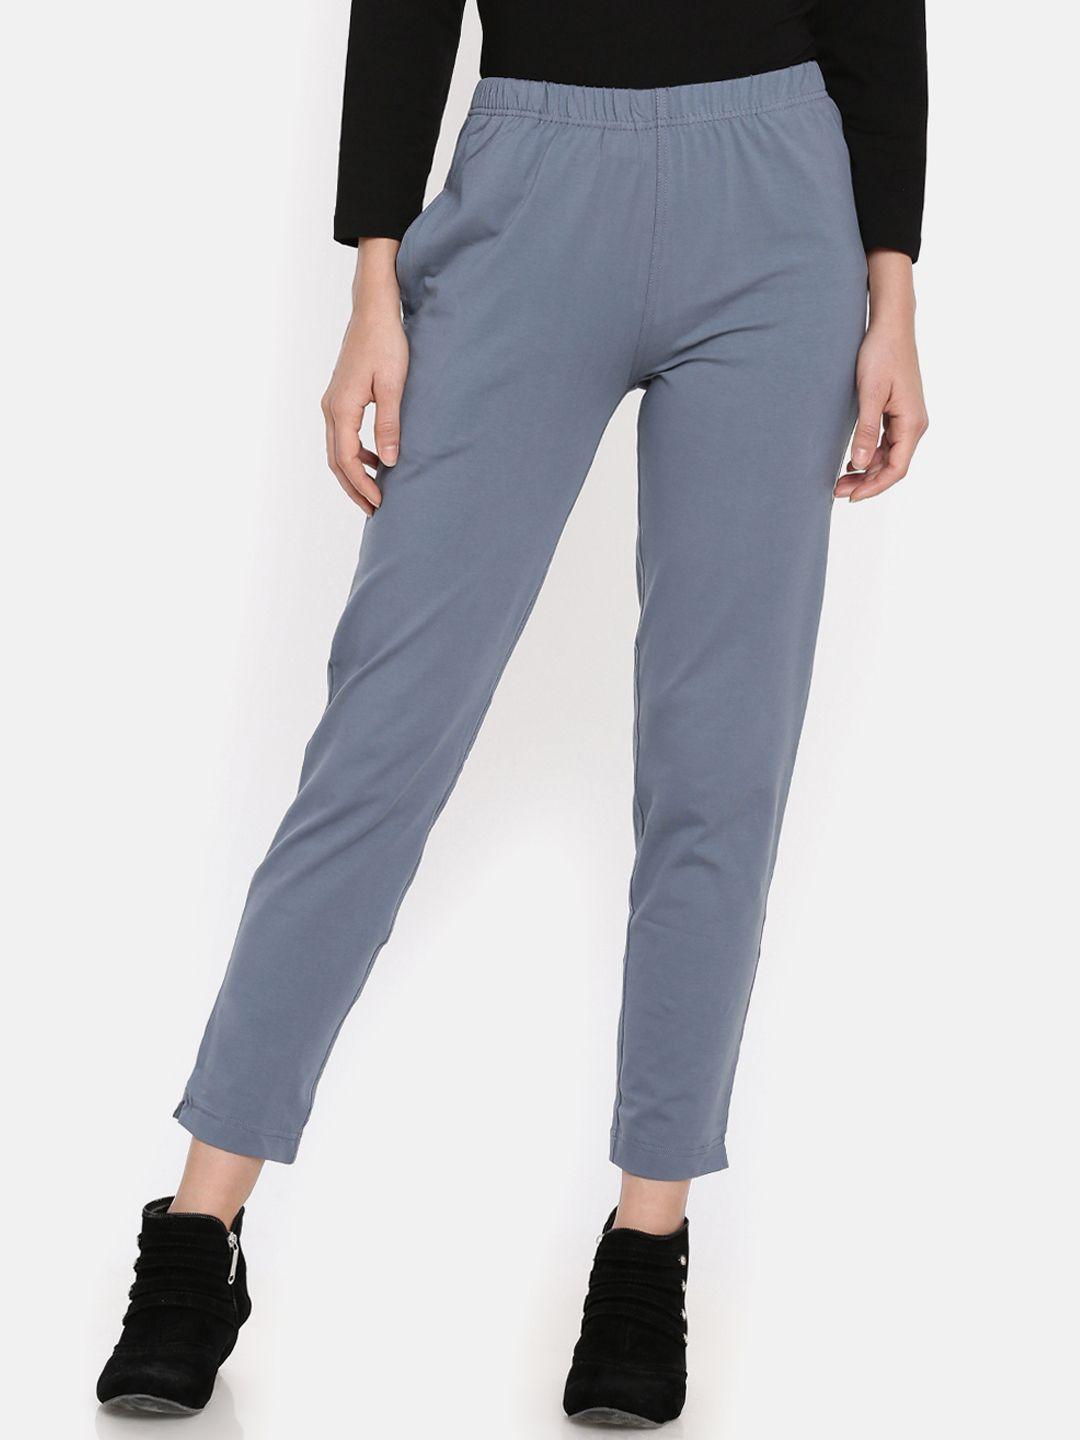 dollar-missy-women-grey-solid-classic-straight-fit-cigarette-trousers